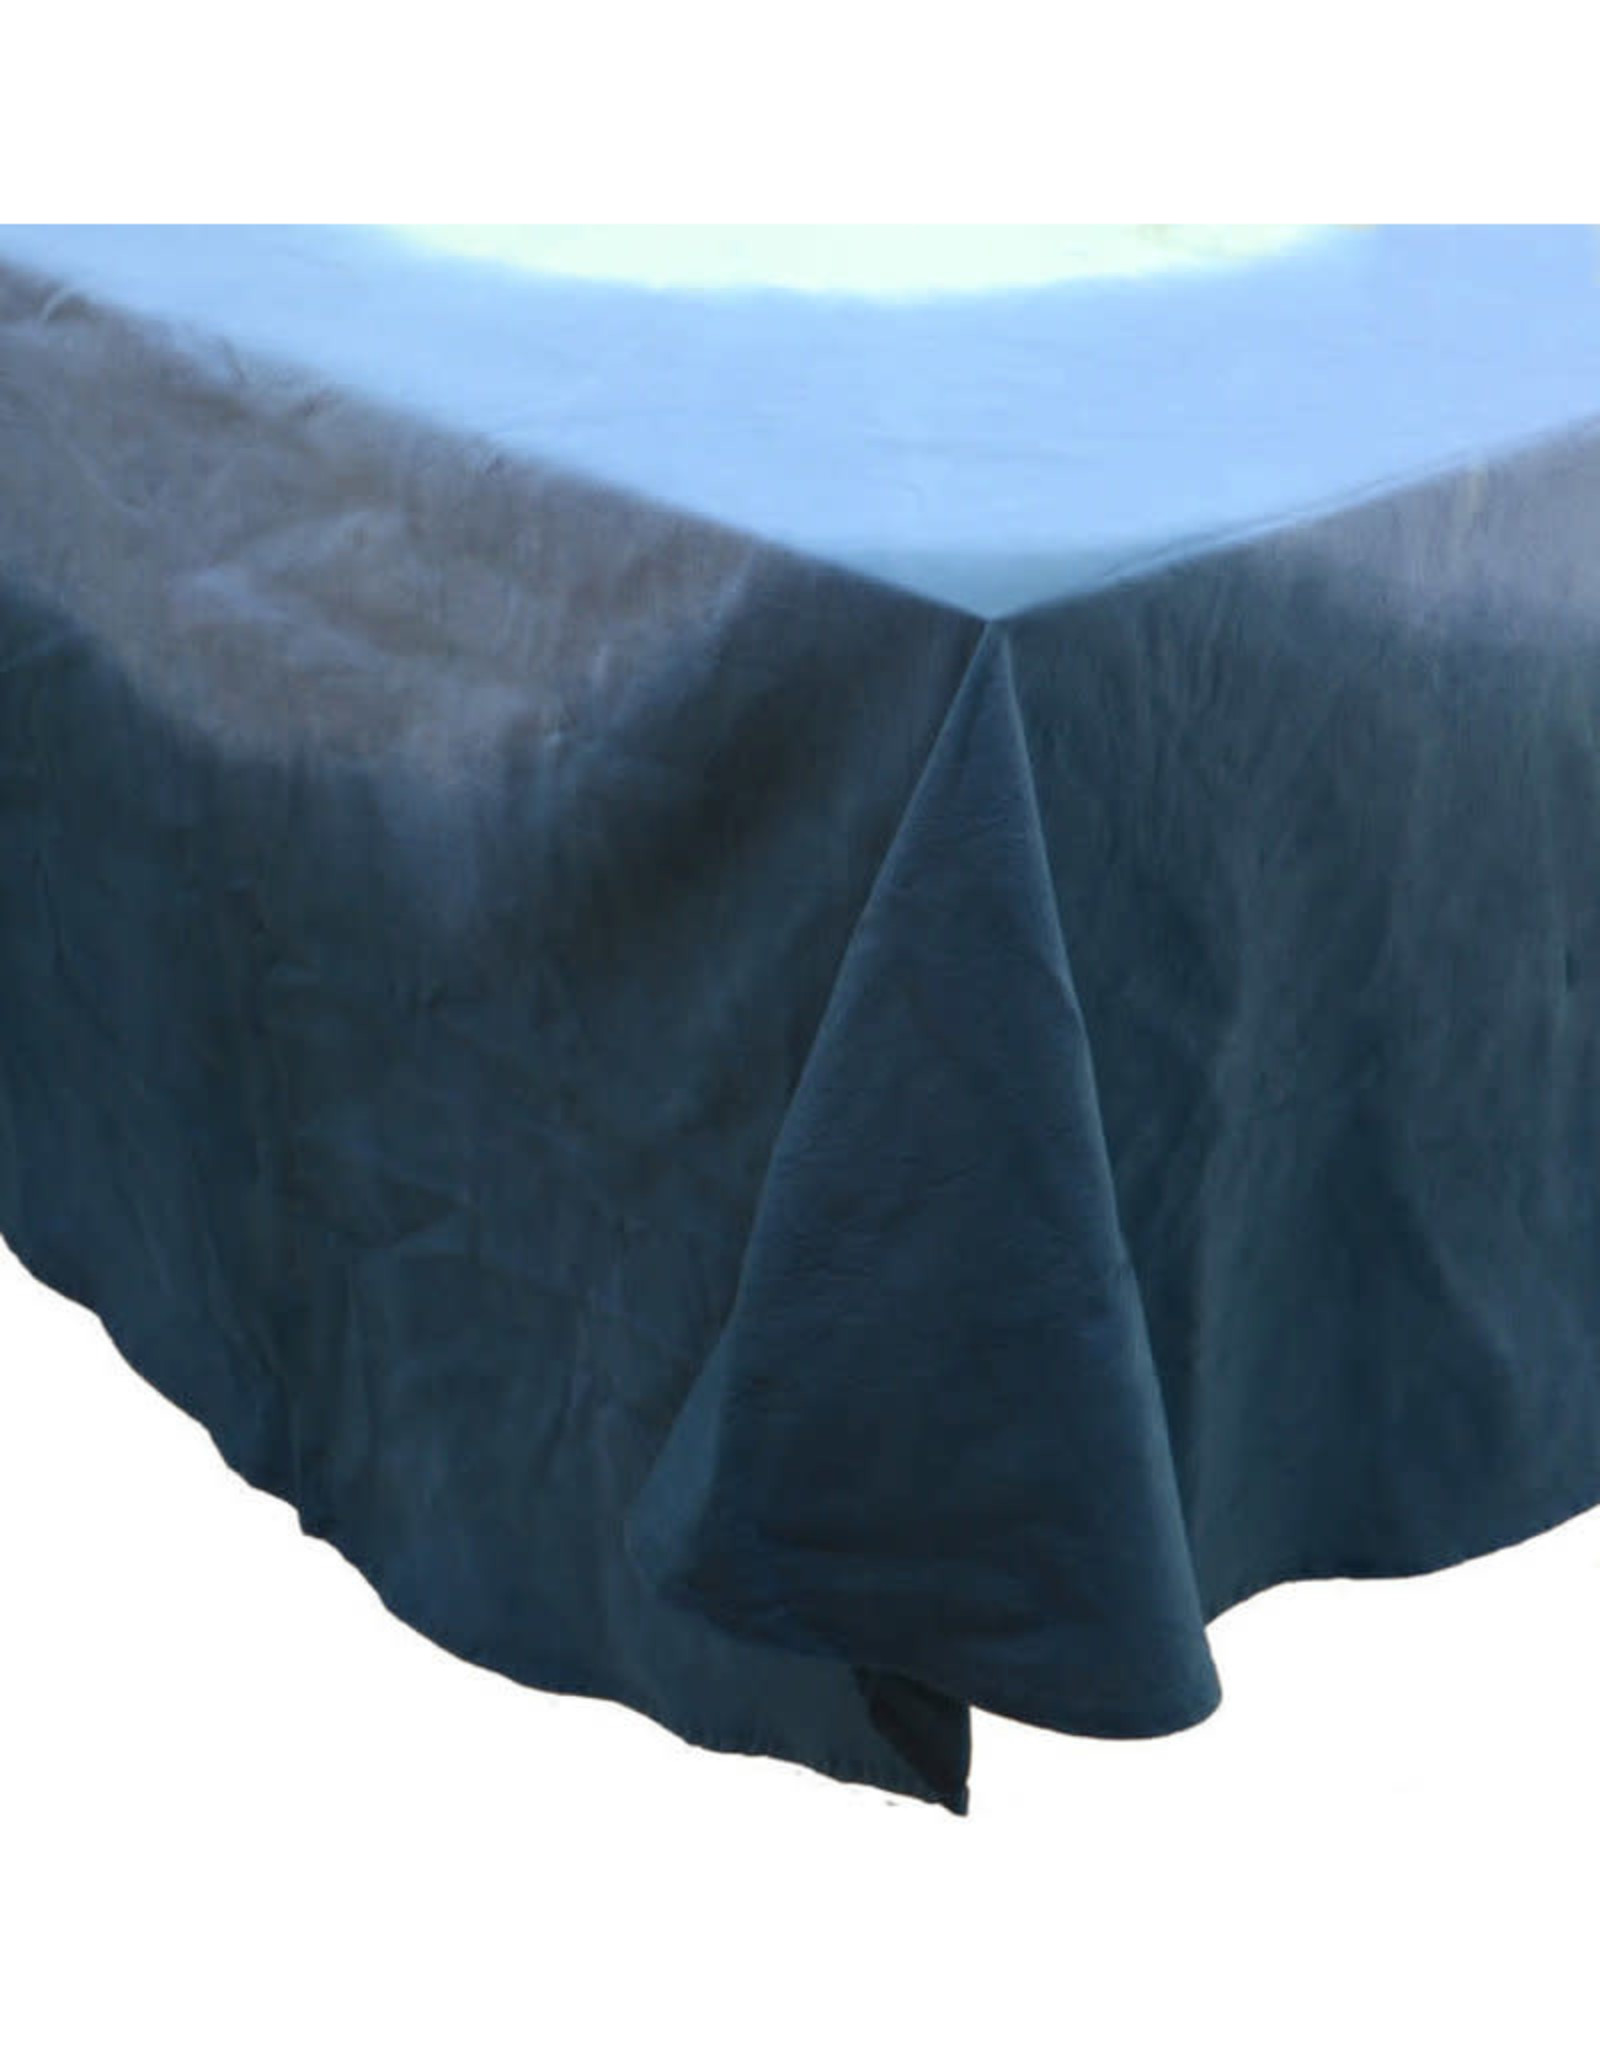 Ten Thousand Villages Tablecloth, Blue Dipped Round - India